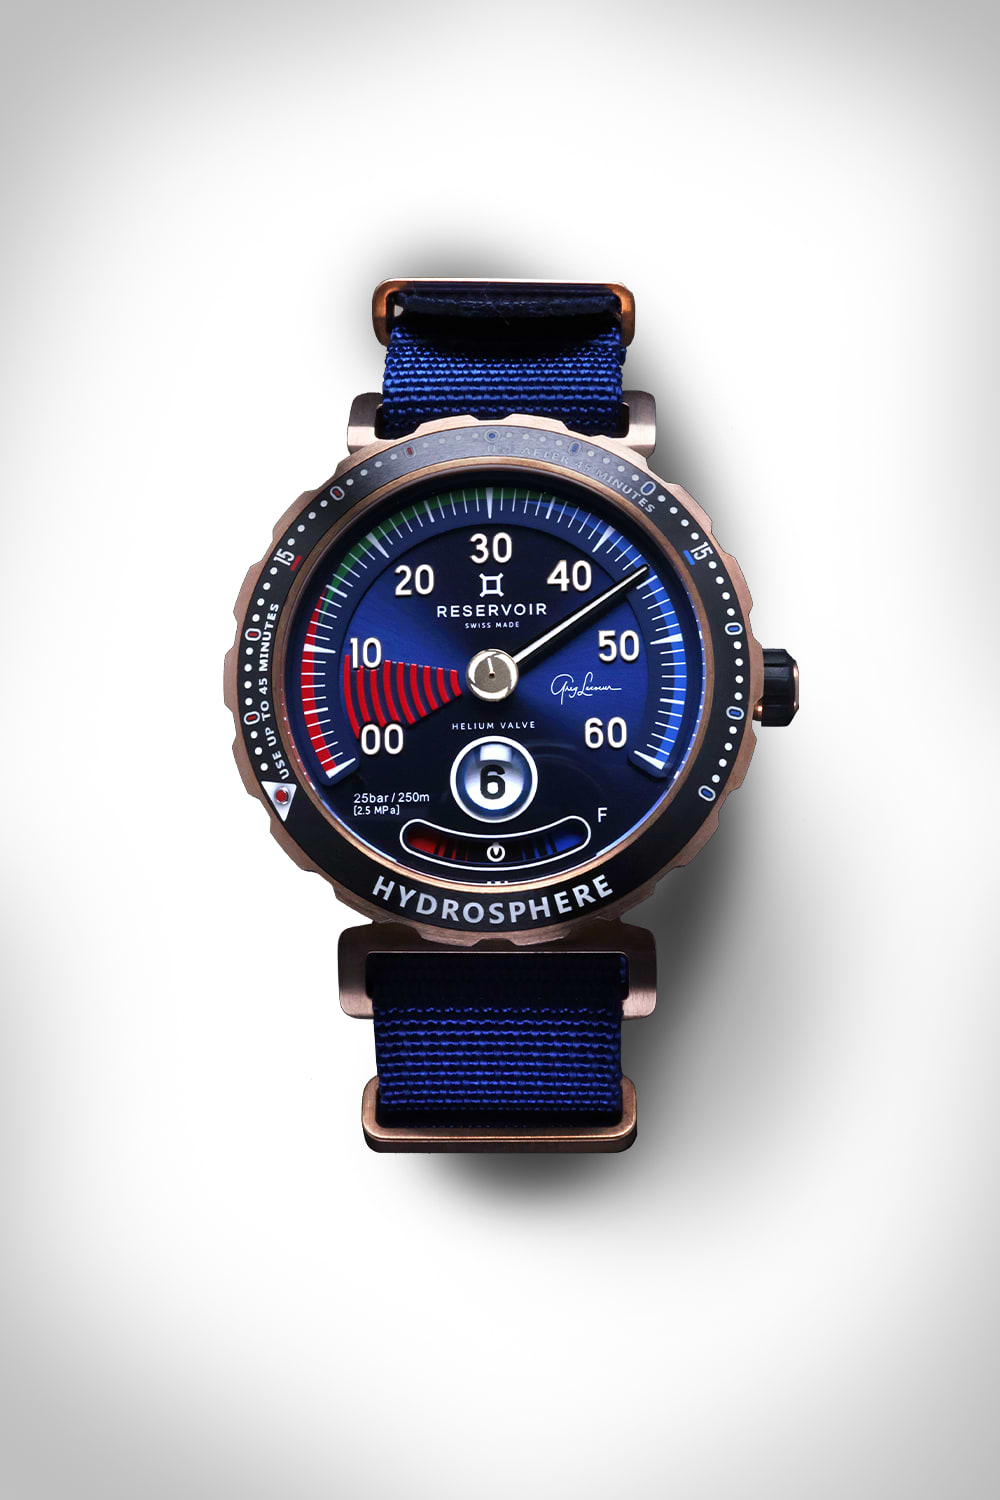 Blue and bronze Swiss-made Reservoir diving watch with helium valve and blue nylon strap.